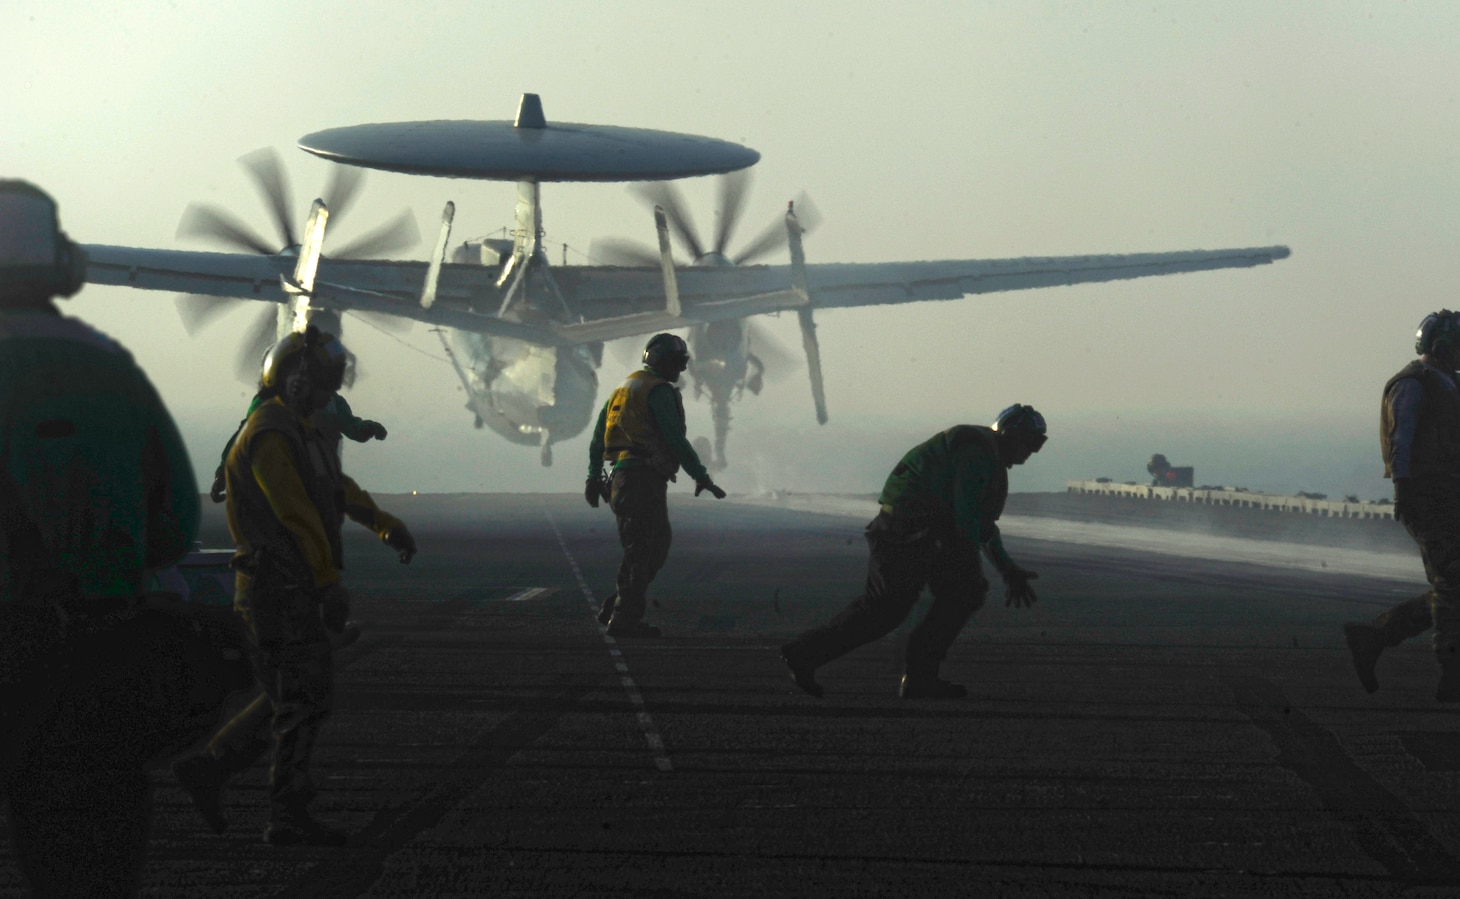 Aviation boatswain's mates recover after launching an E-2C Hawkeye assigned to the Golden Hawks of Airborne Early Warning Squadron (VAW) 112 during flight operations aboard the aircraft carrier USS John C. Stennis (CVN 74). John C. Stennis was deployed to the U.S. 5th Fleet area of responsibility conducting maritime security operations and support missions as part of Operations Enduring Freedom and New Dawn.